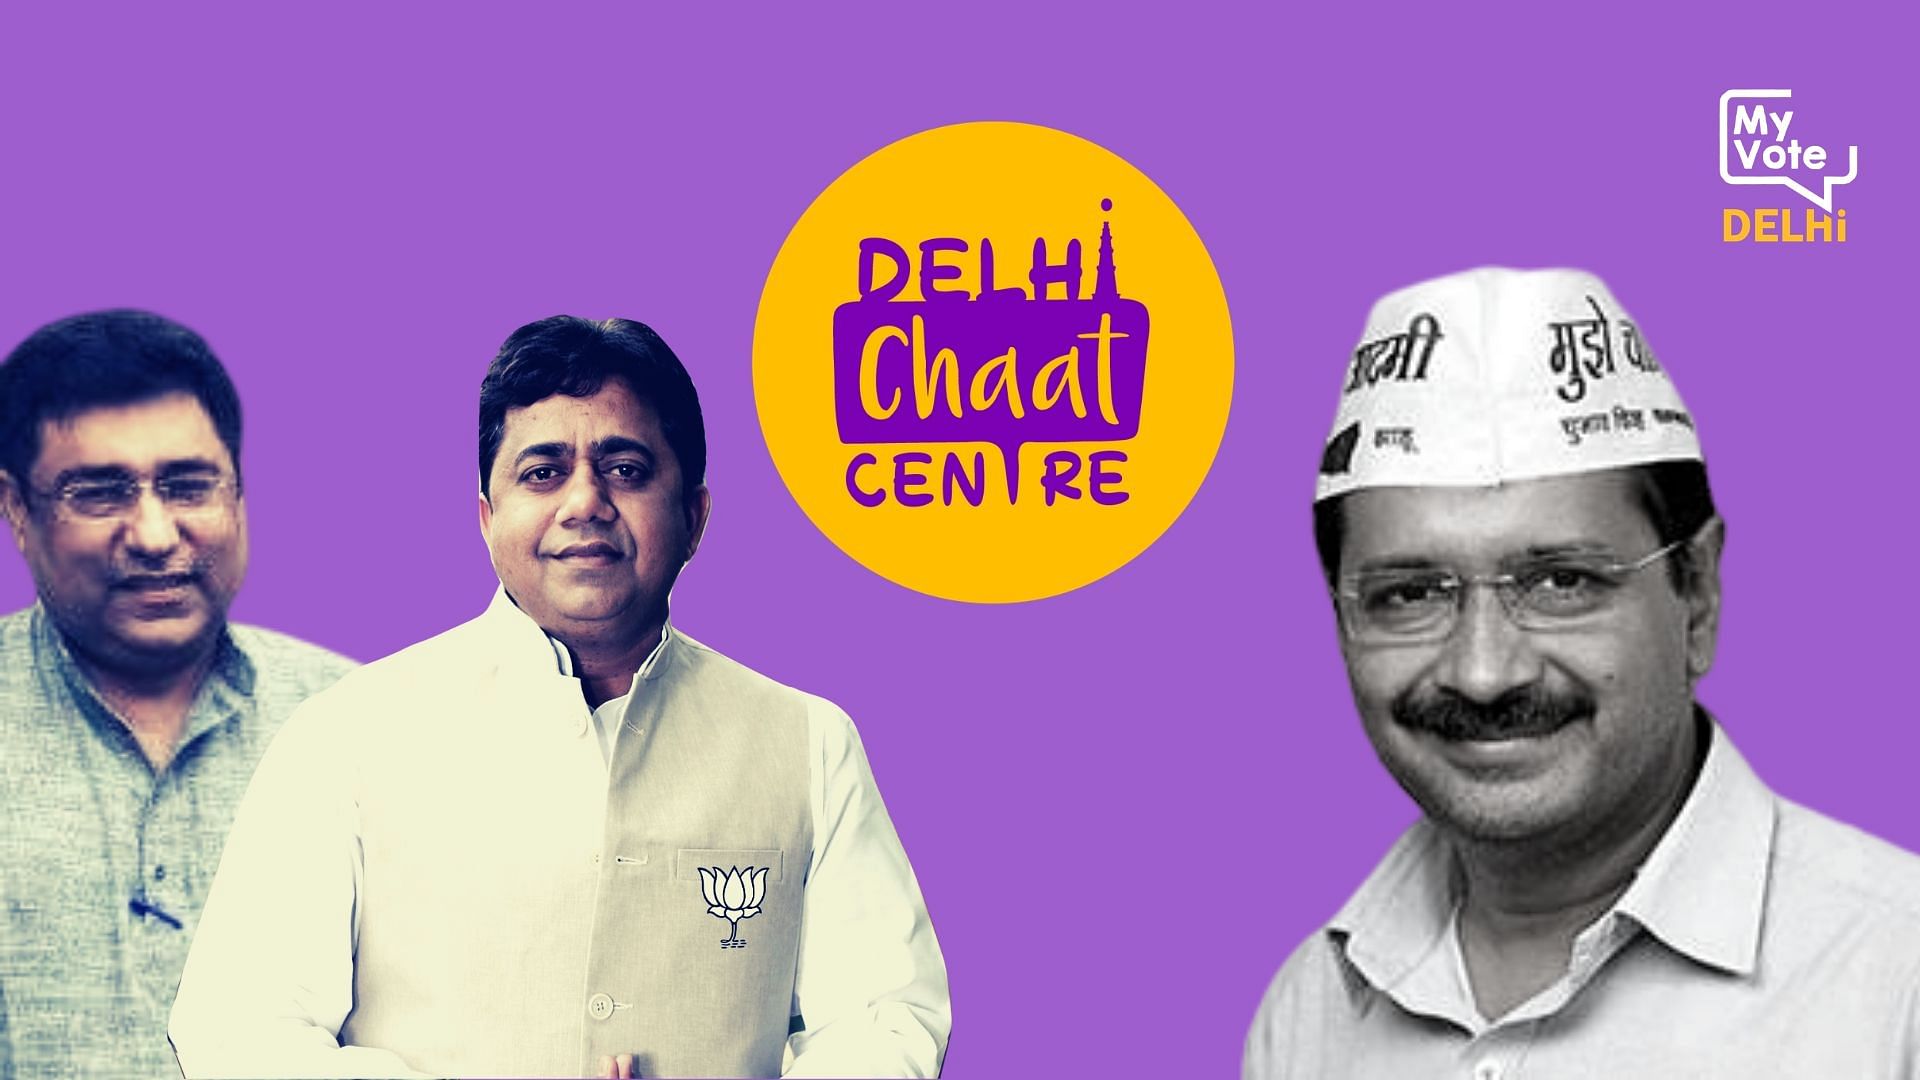 Has BJP and Congress given a free pass to Kejriwal in his constituency?